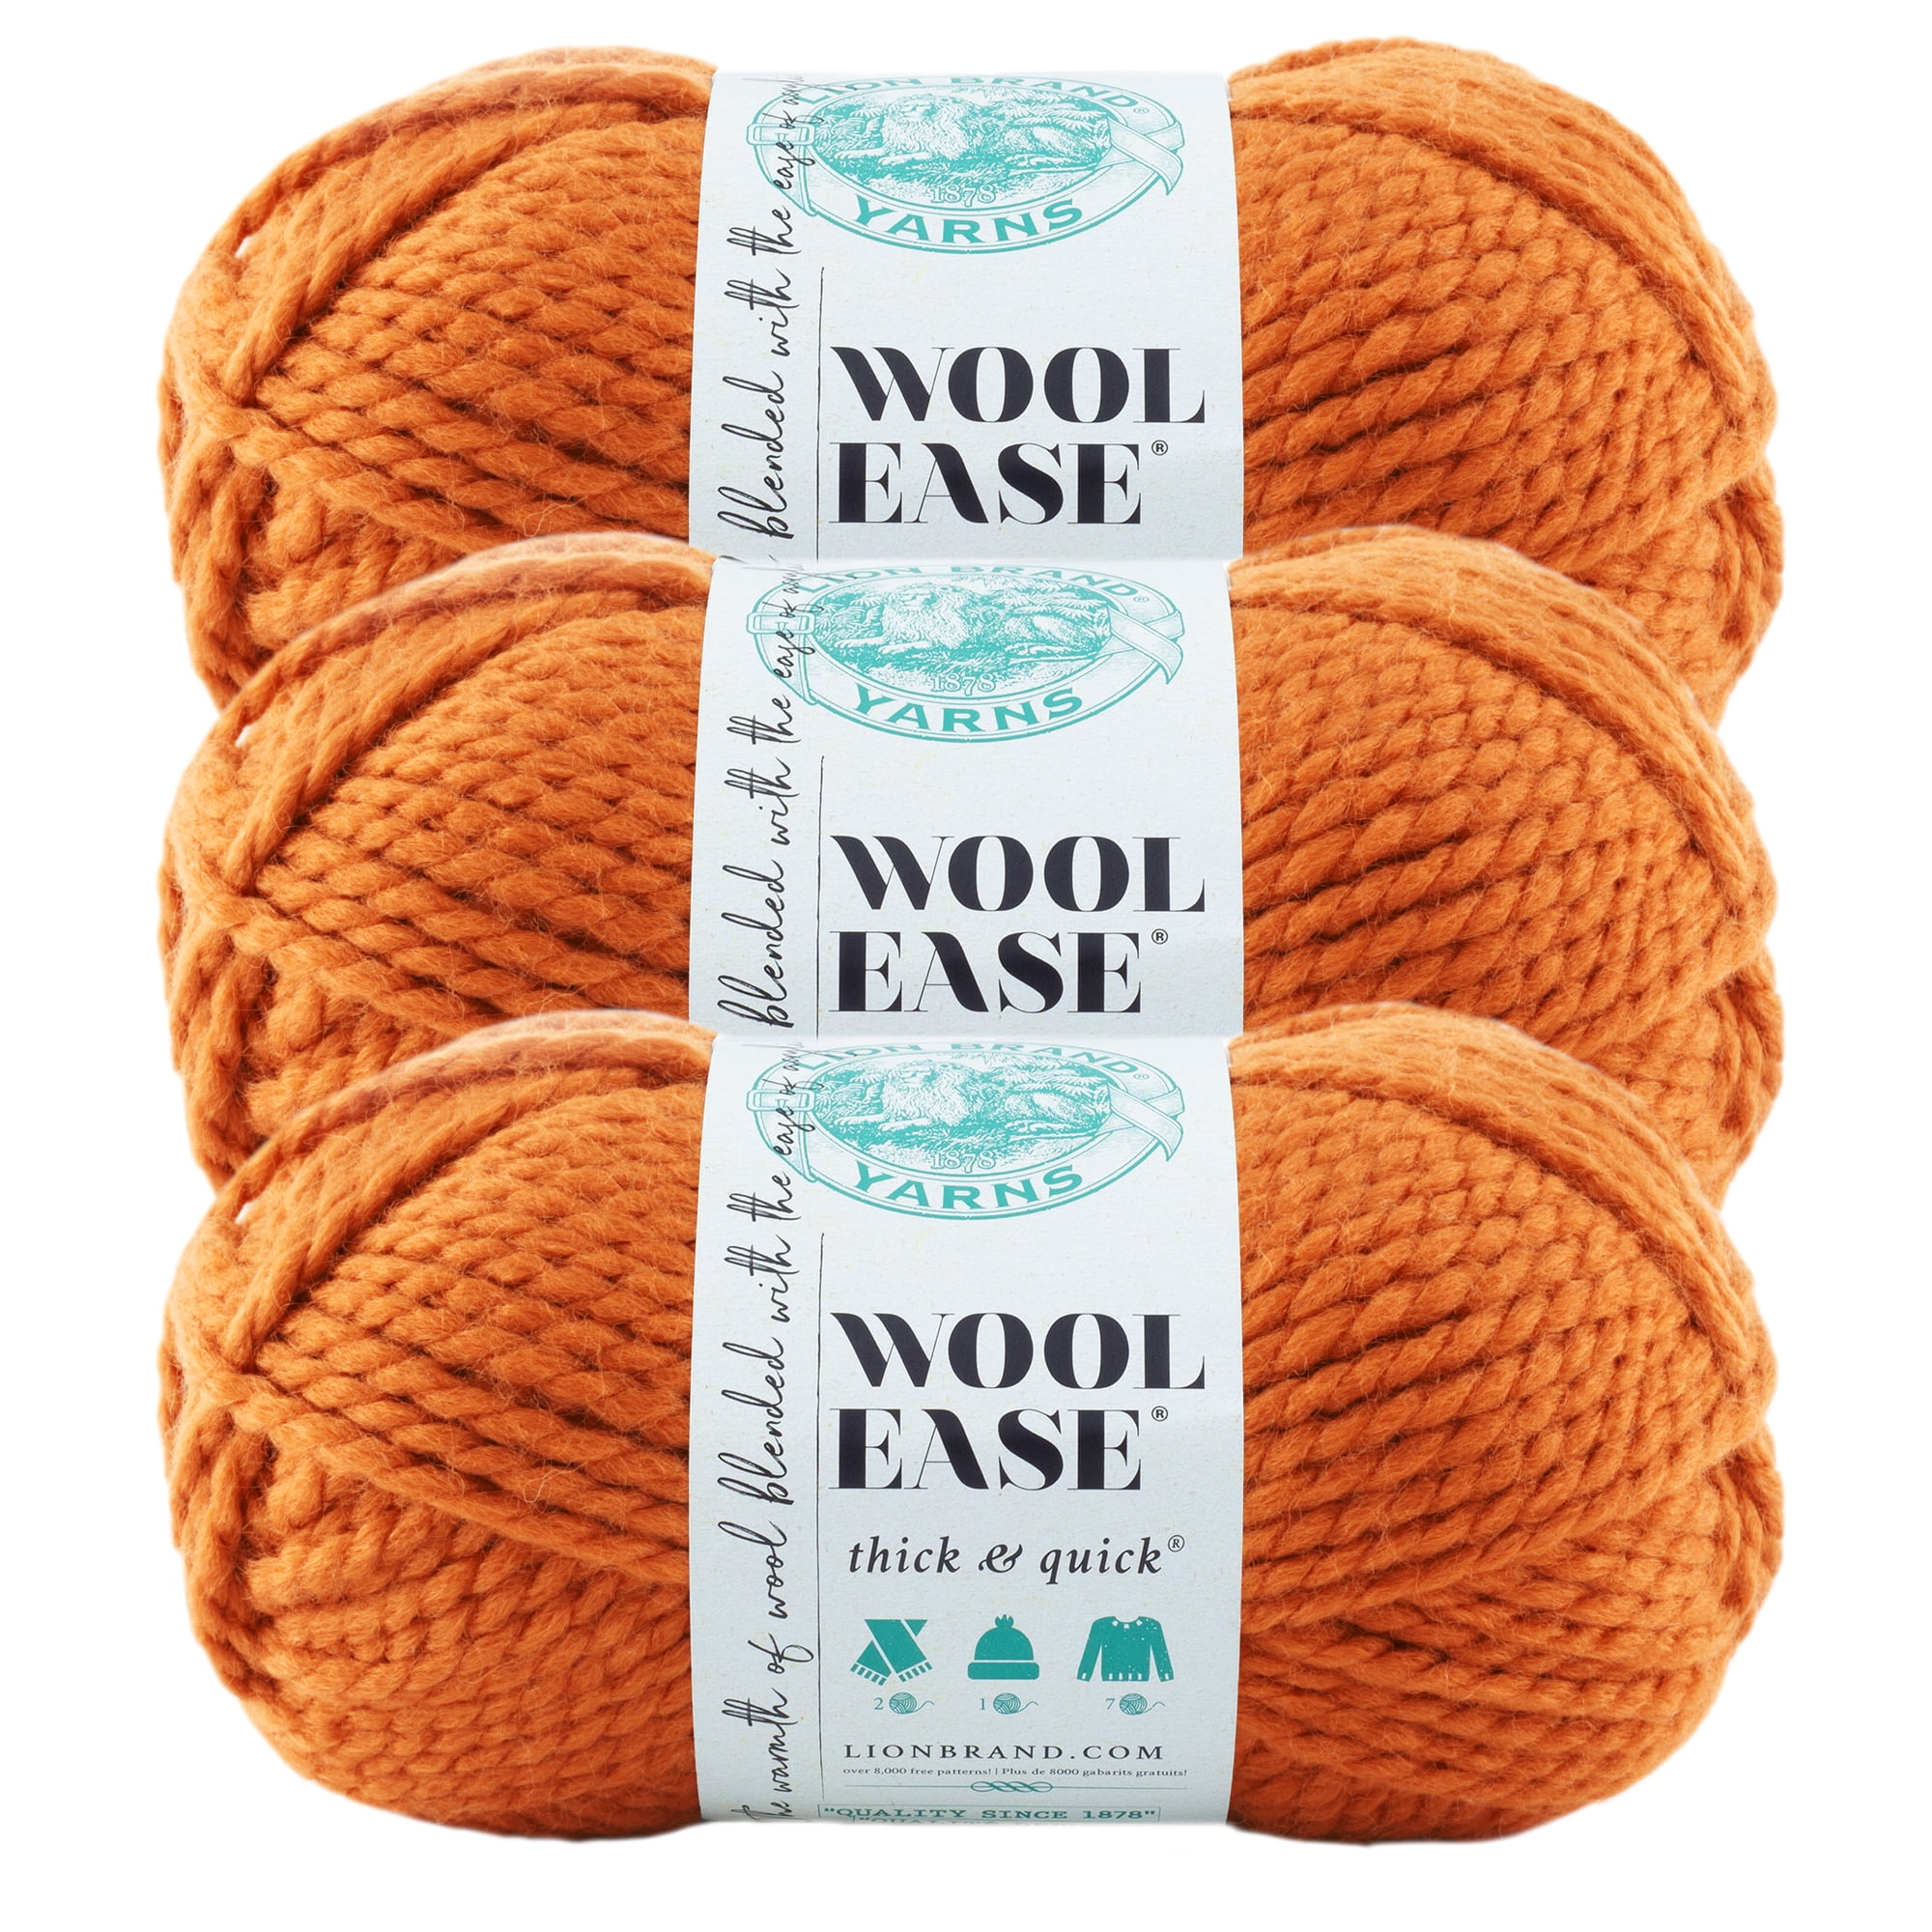 3 Lion Brand Wool-Ease Thick & Quick Yarn Grey Marble 6oz 